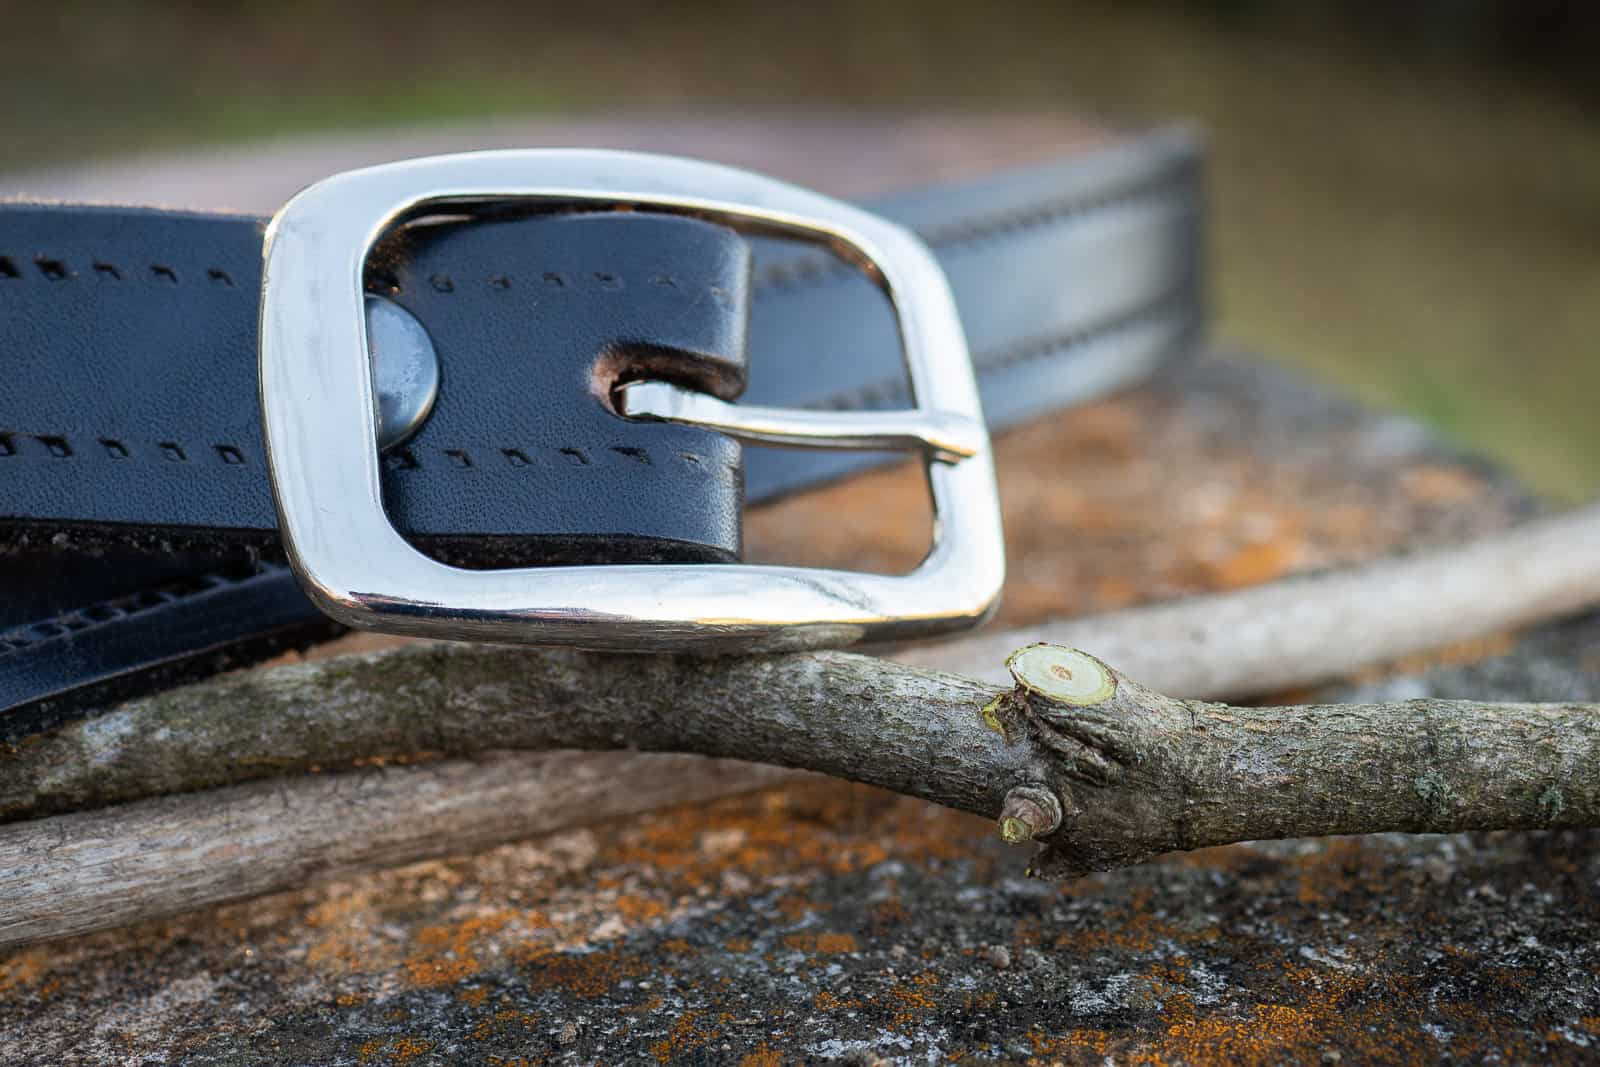 In a close up, the silver buckle of a black leather belt sits on a couple twigs, one with a pruning cut. All items sit on old weathered concrete.